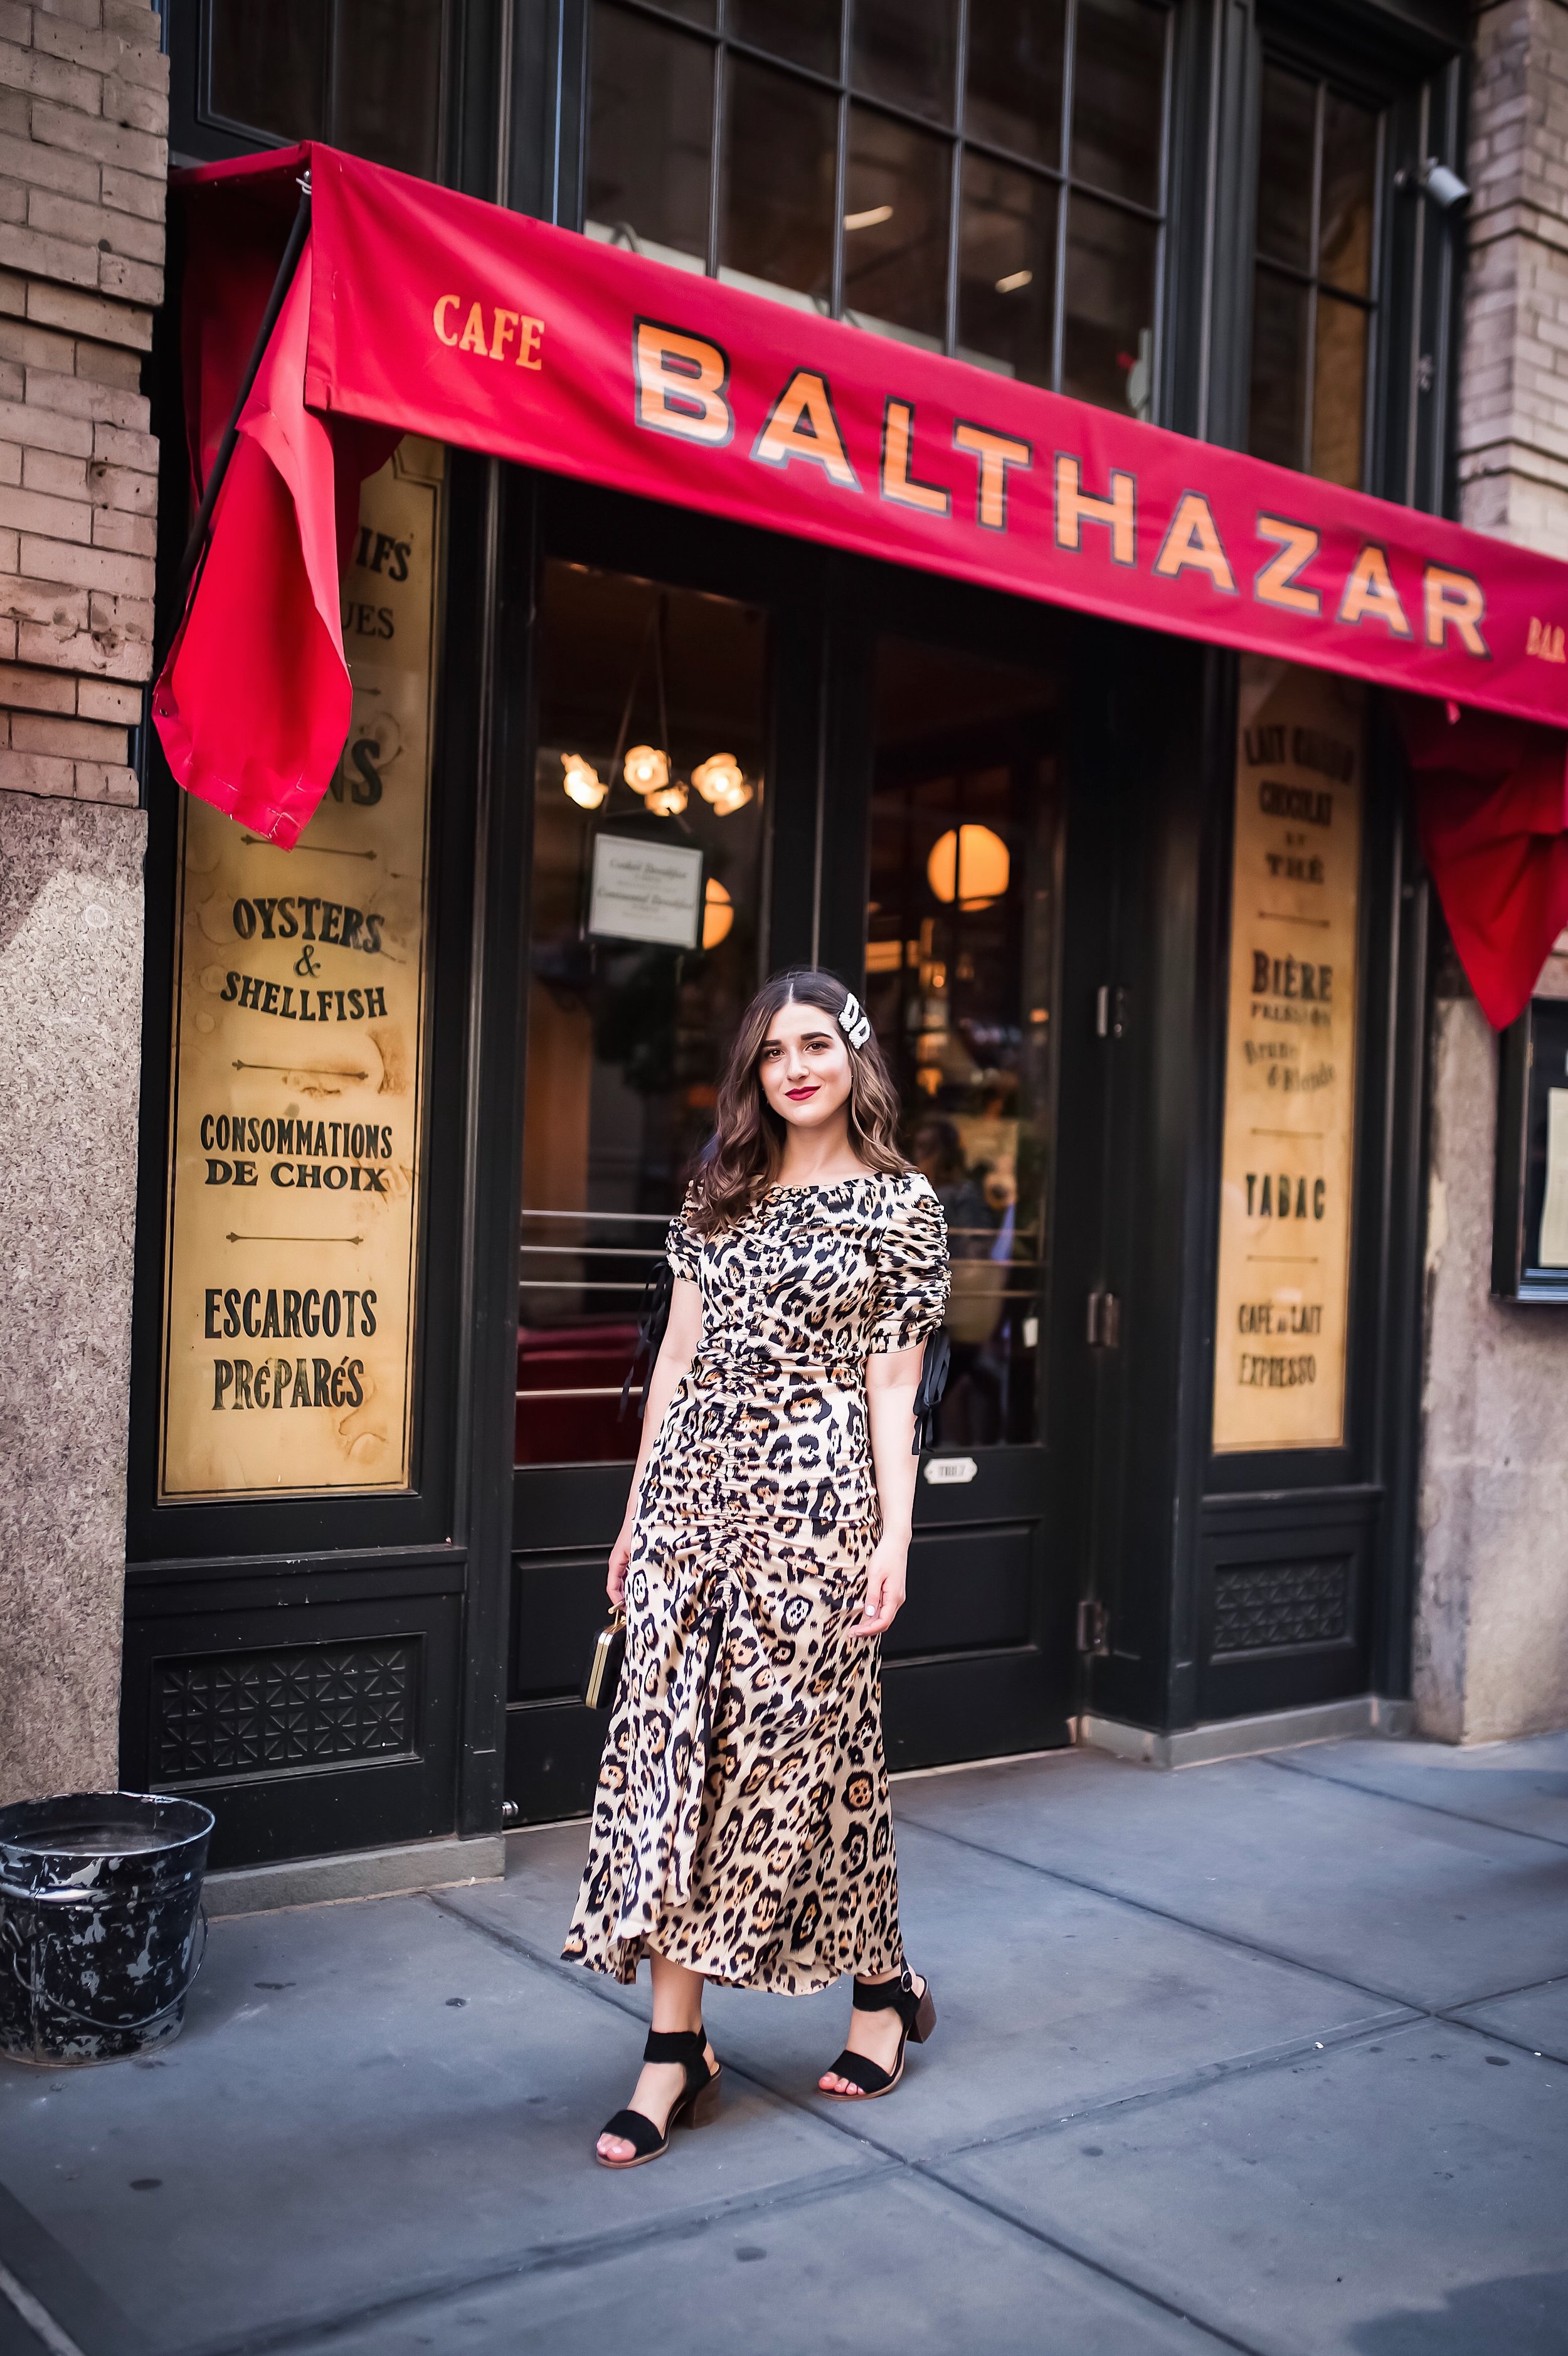 July 3 2019 Leopard Dress Pearl Hair Clips Esther Santer Fashion Blog NYC Street Style Blogger Outfit OOTD Trendy Shopping Girl What How To Wear Cheetah Black Braided Sandals Vince Camuto Balthazar Restaurant New York City Soho Clothing Photoshoot Bag.jpg